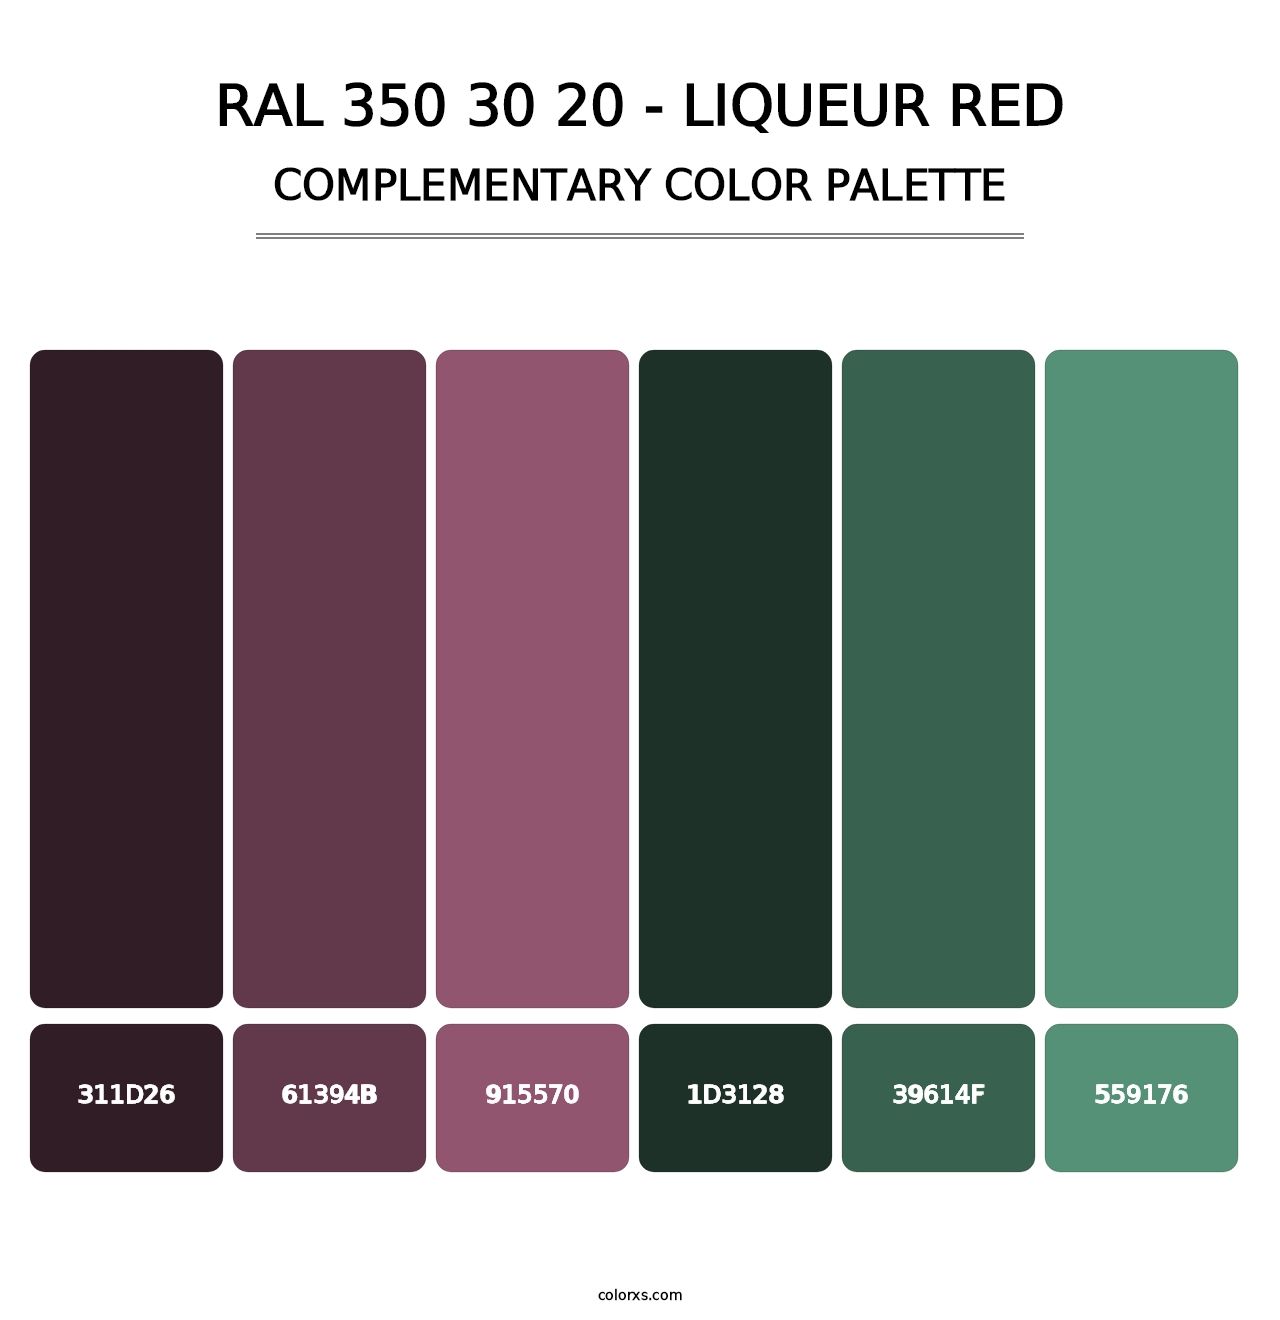 RAL 350 30 20 - Liqueur Red - Complementary Color Palette